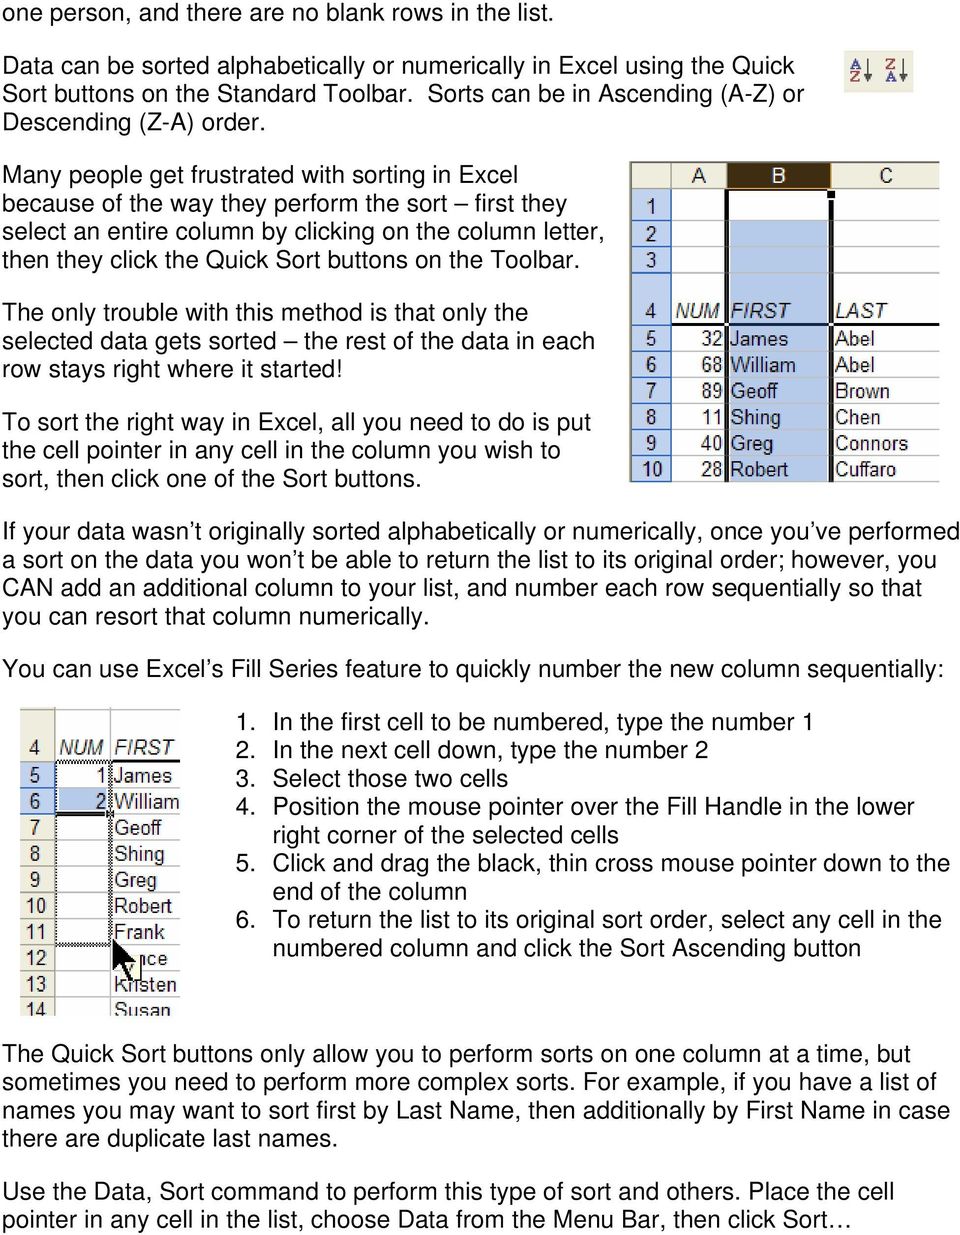 Many people get frustrated with sorting in Excel because of the way they perform the sort first they select an entire column by clicking on the column letter, then they click the Quick Sort buttons